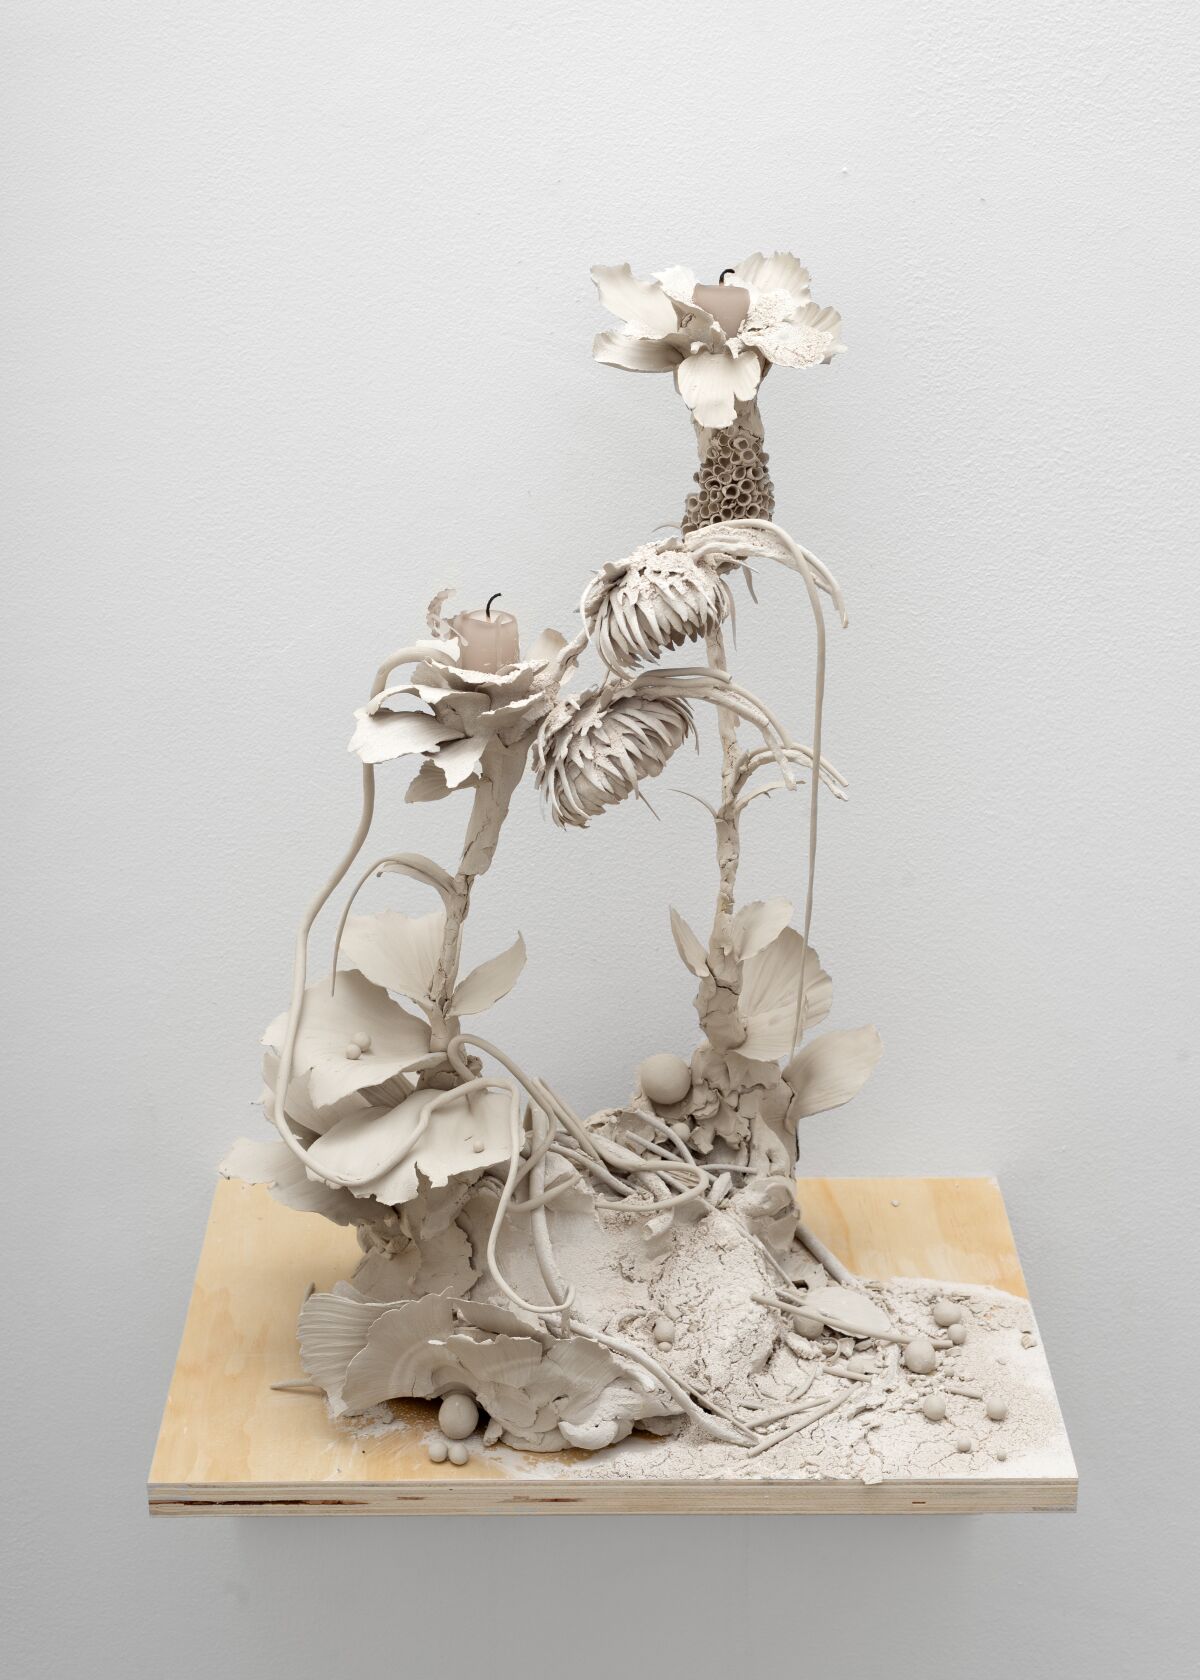 A raw clay sculpture, in Phoebe Cummings' "Cut," conveys the ephemerality of life.